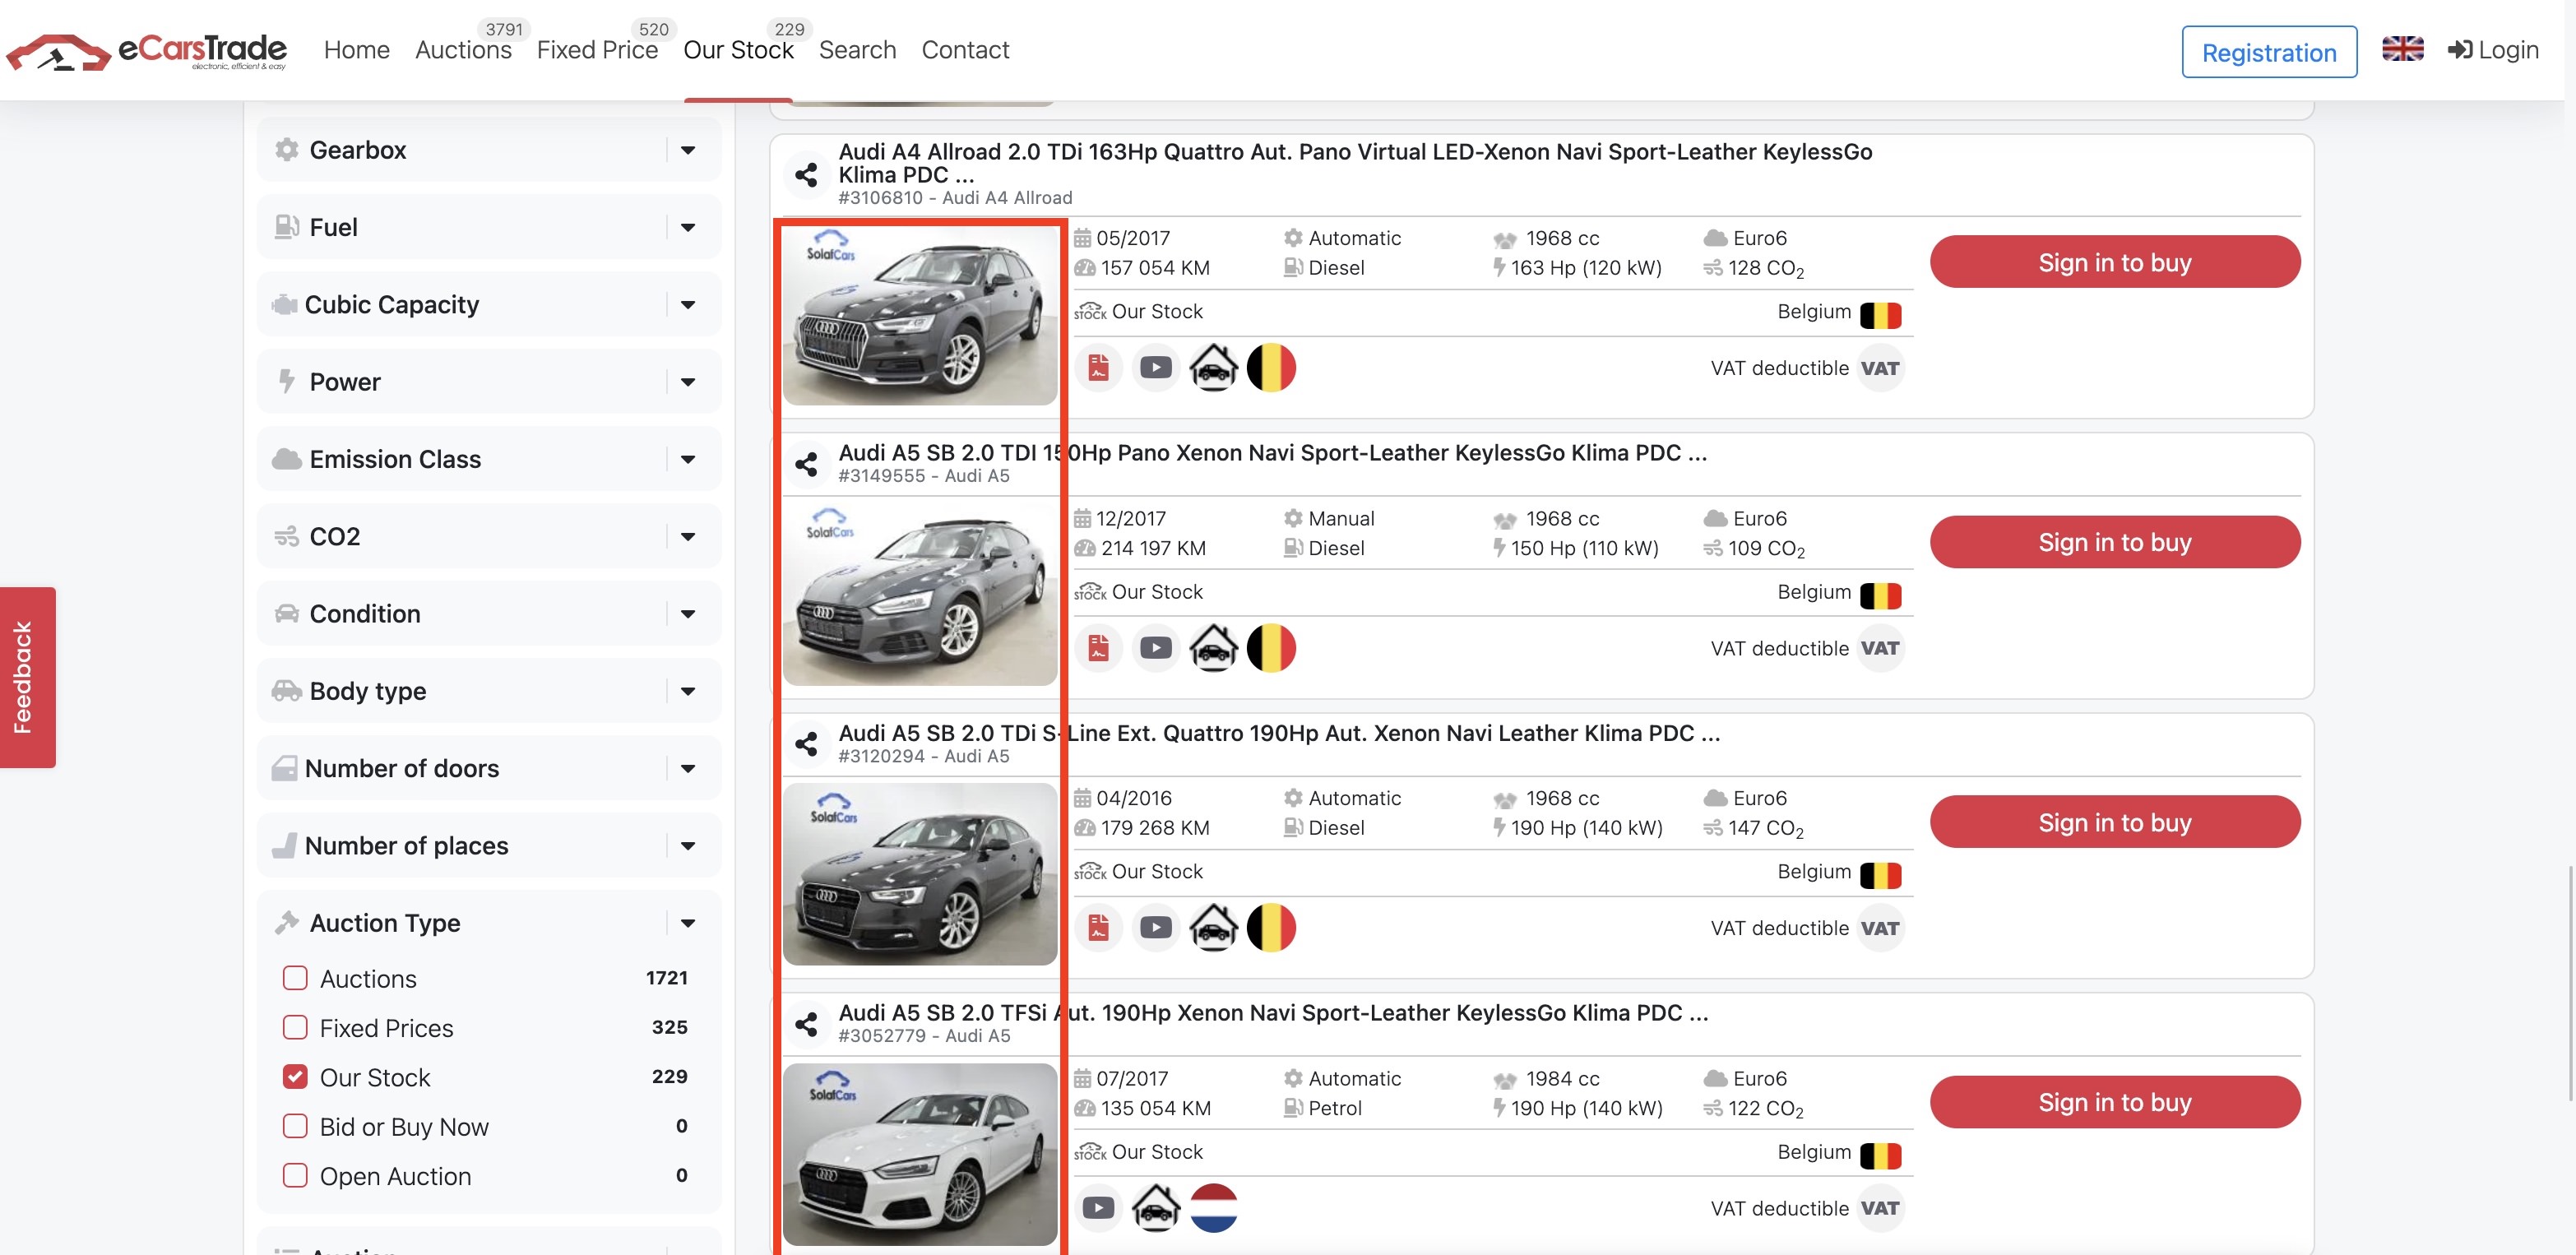 eCarsTrade screenshot from website showing photos of cars